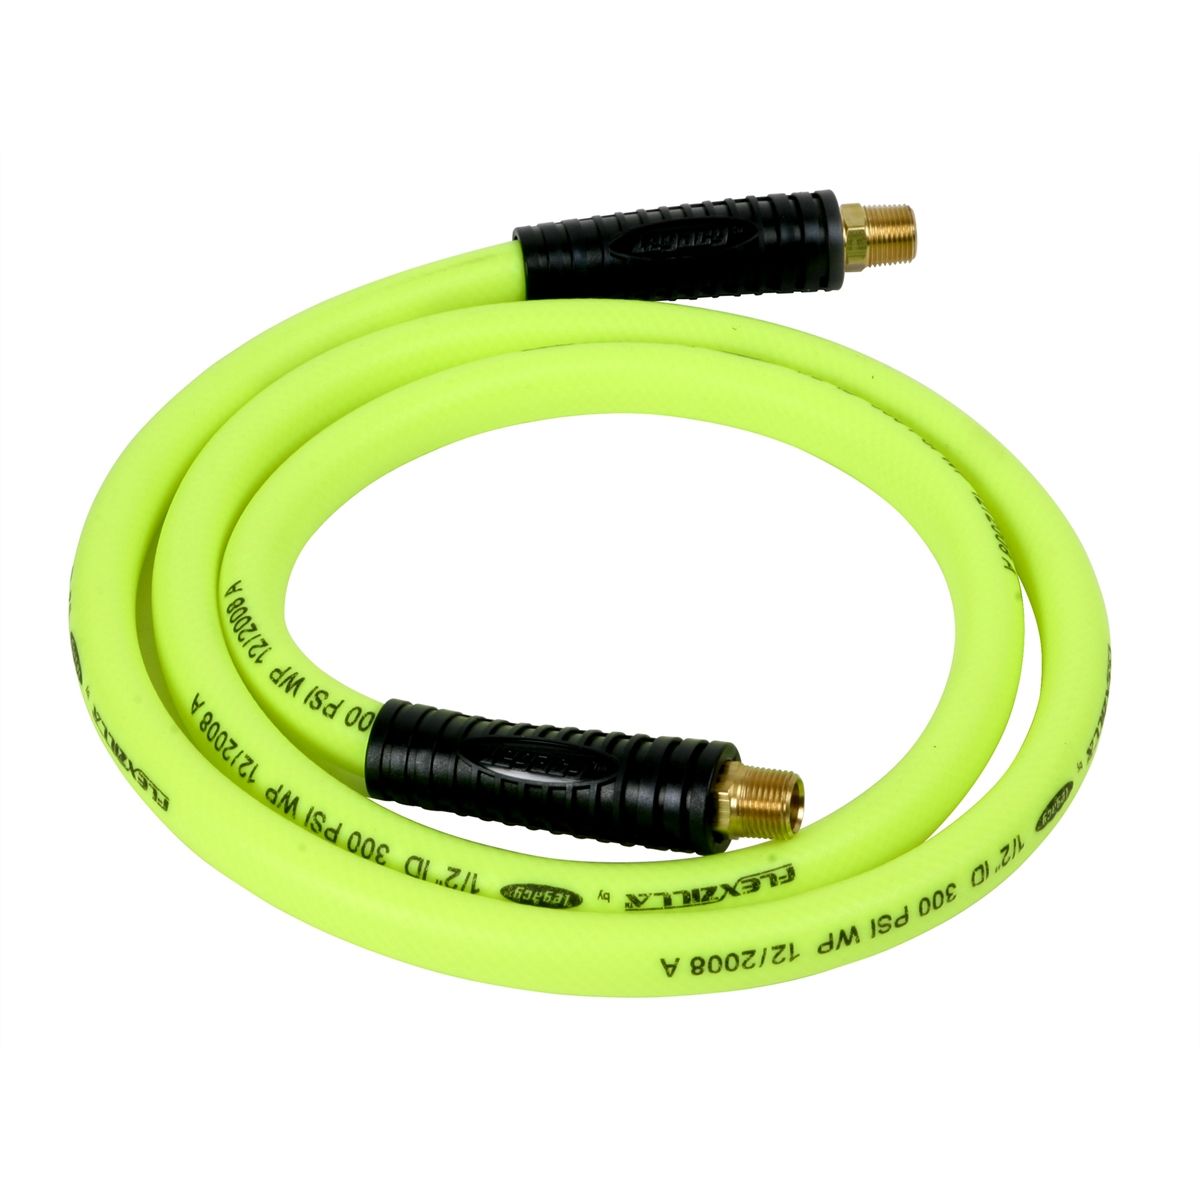 Zilla Whip 1/2 Inch x 6 Ft Swivel Whip Hose 3/8 Inch NPT